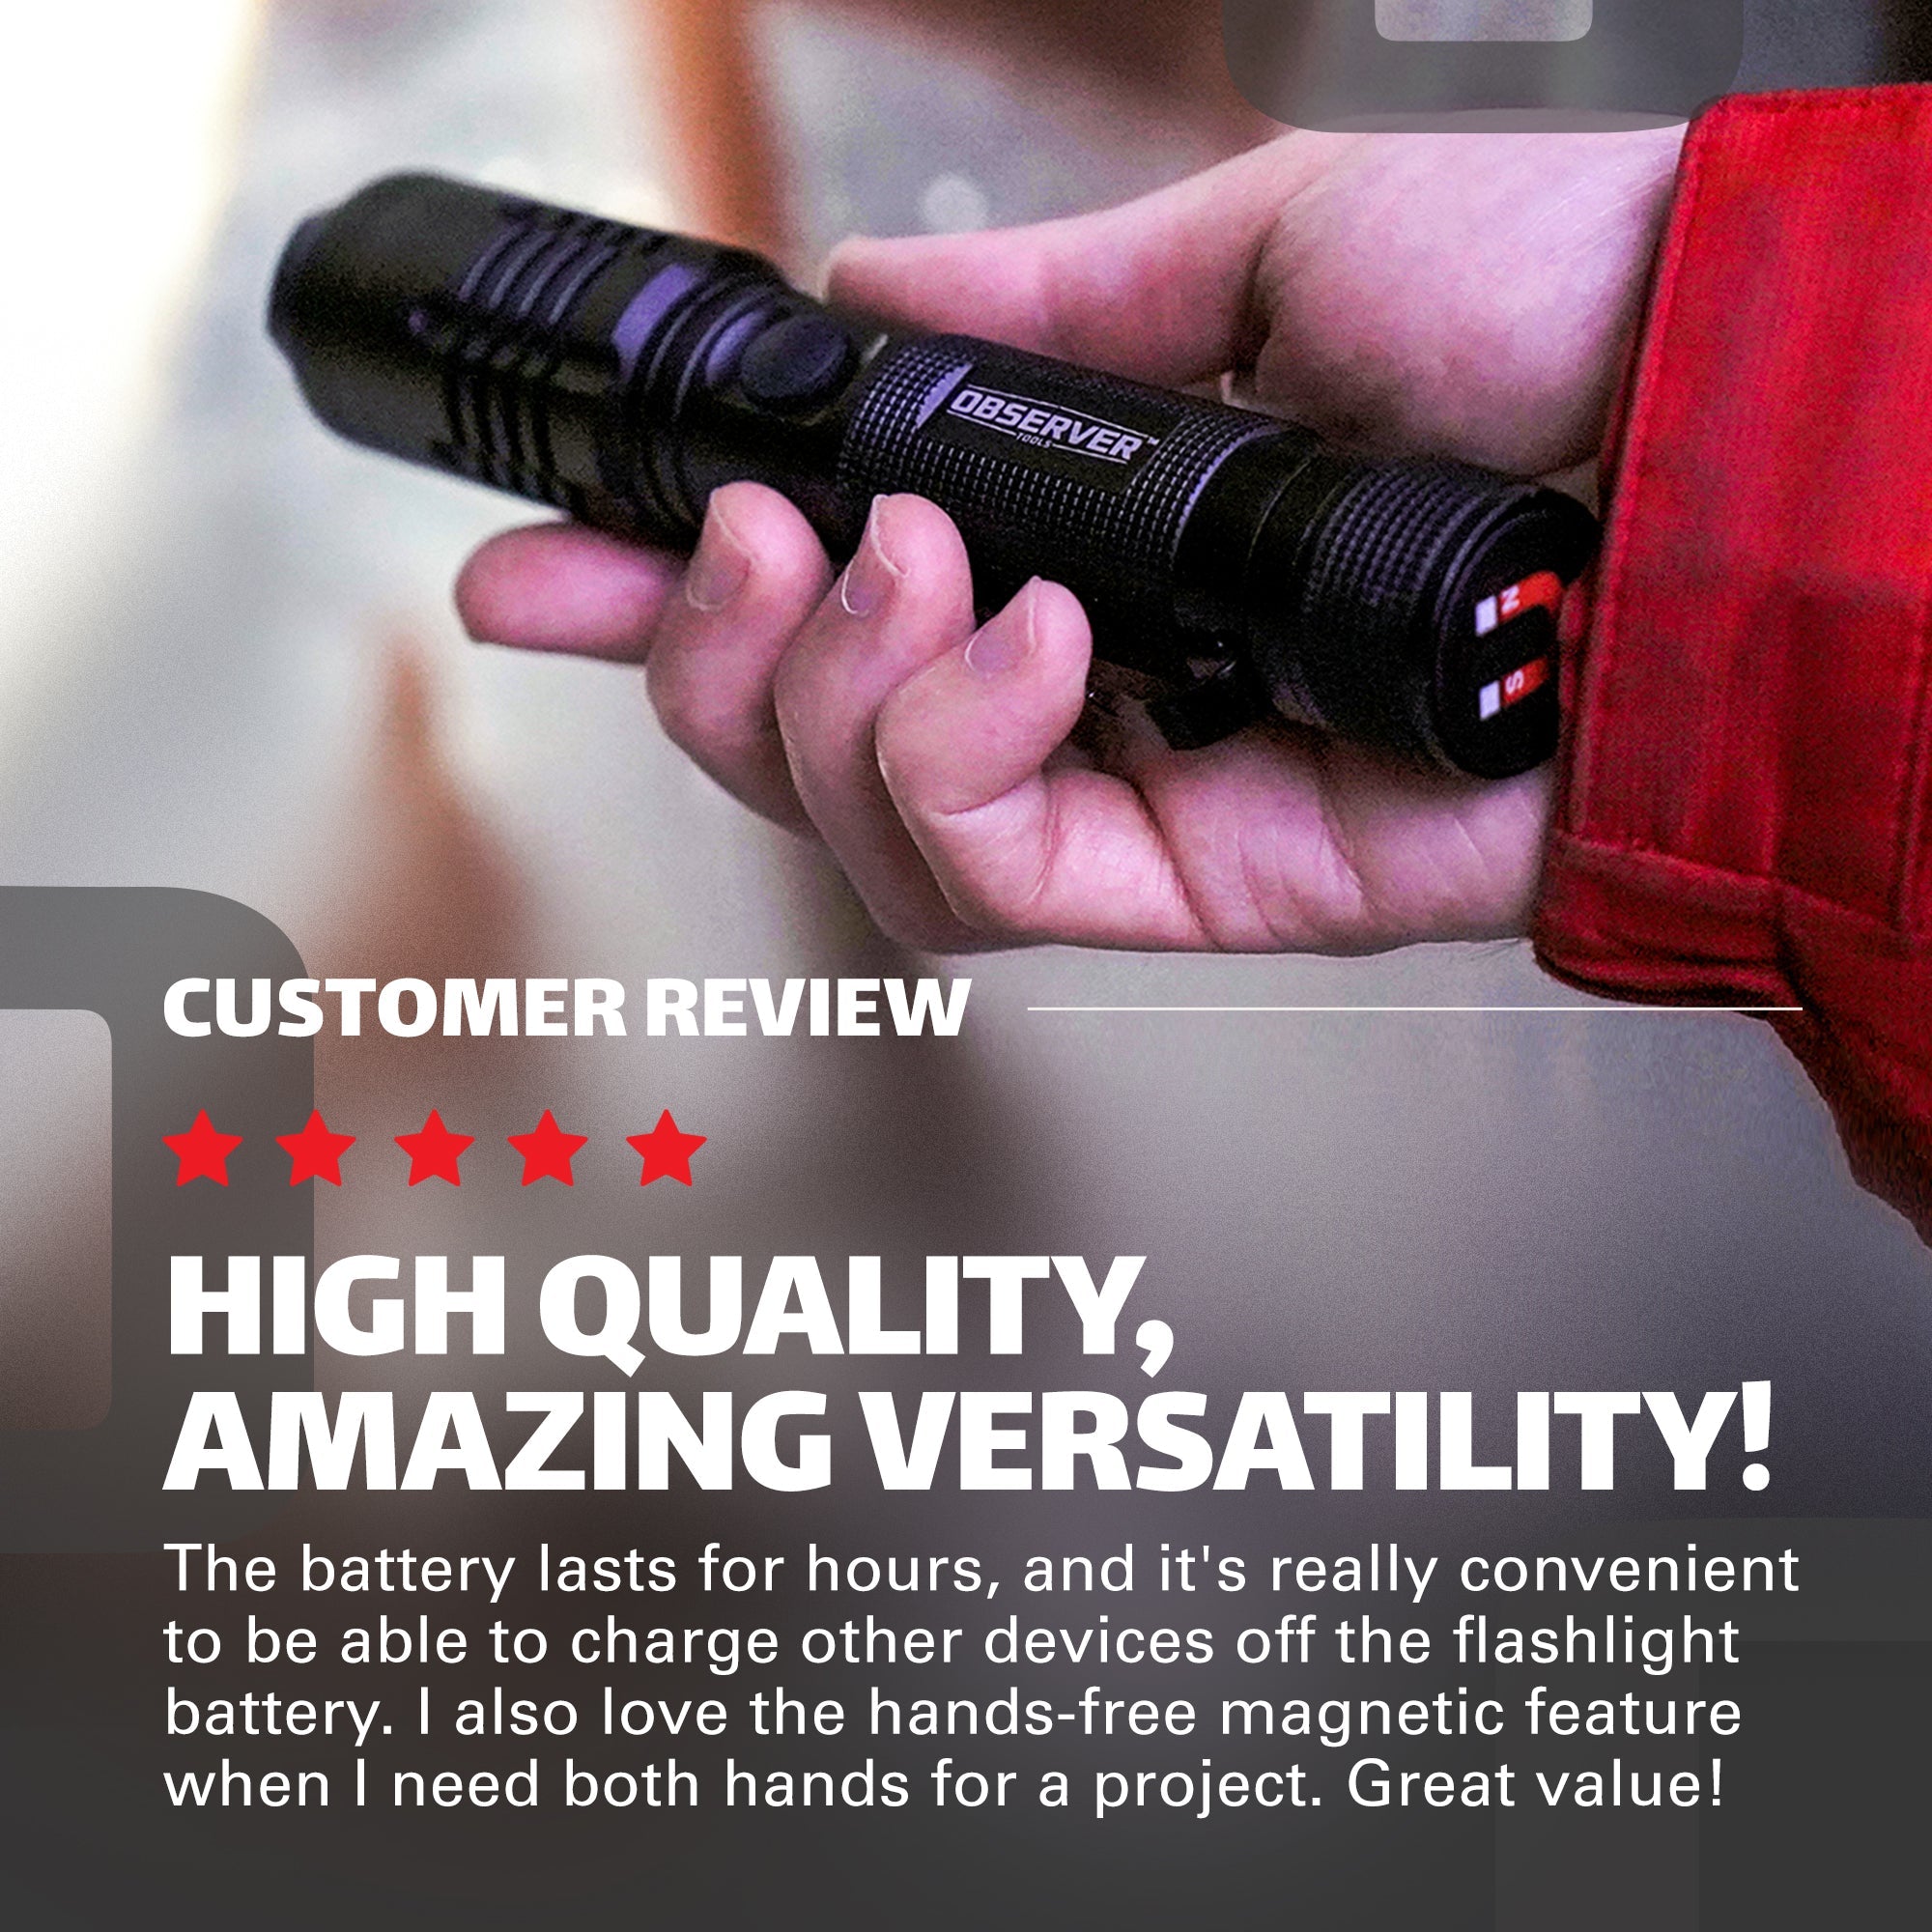 1000 Lumen Tactical LED Rechargeable Flashlight with Power Bank & Dual Power - Observer Tools